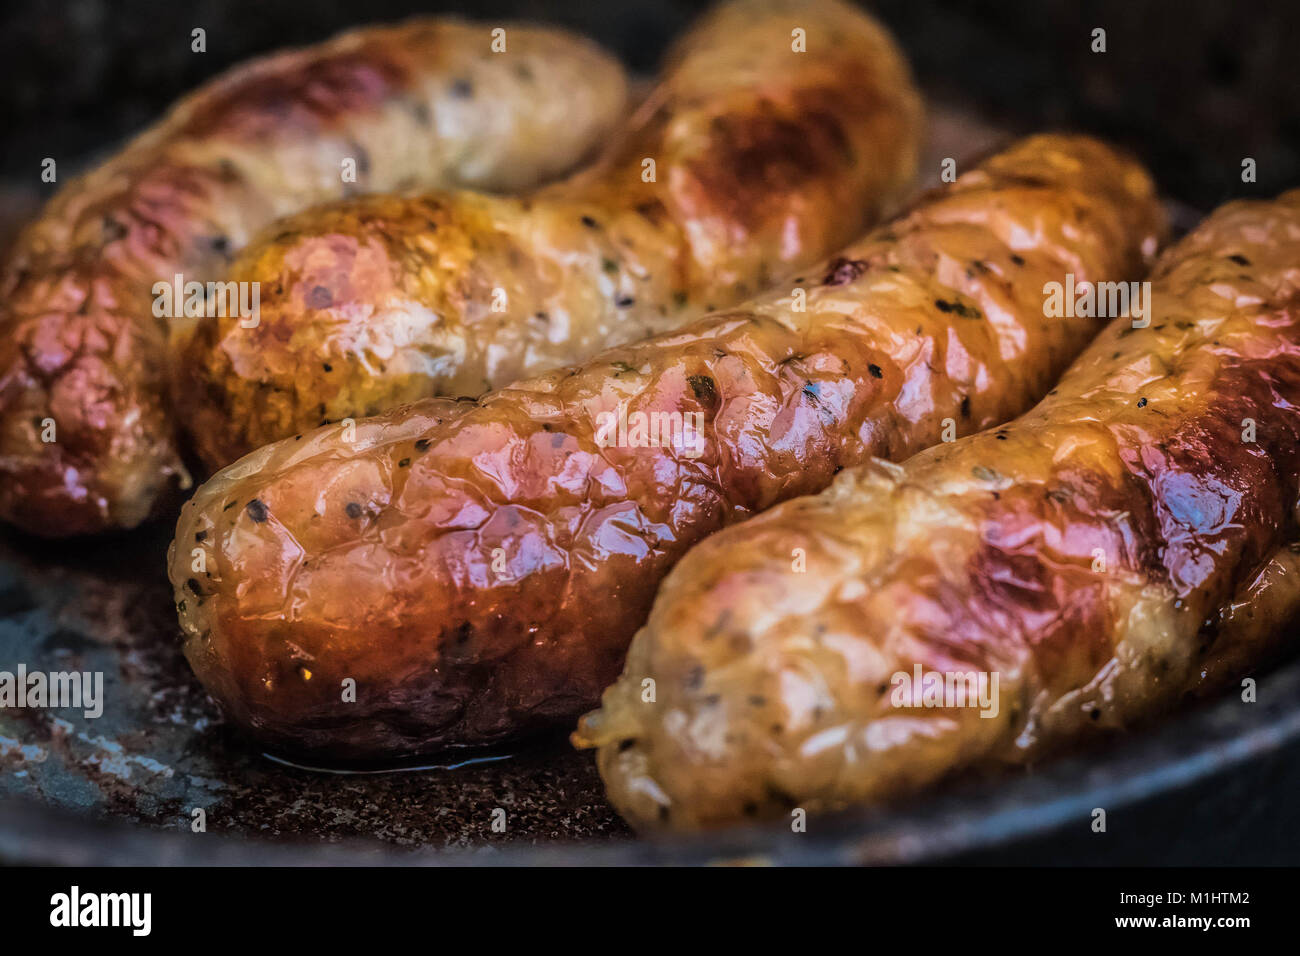 Cooked Sausages close up Stock Photo